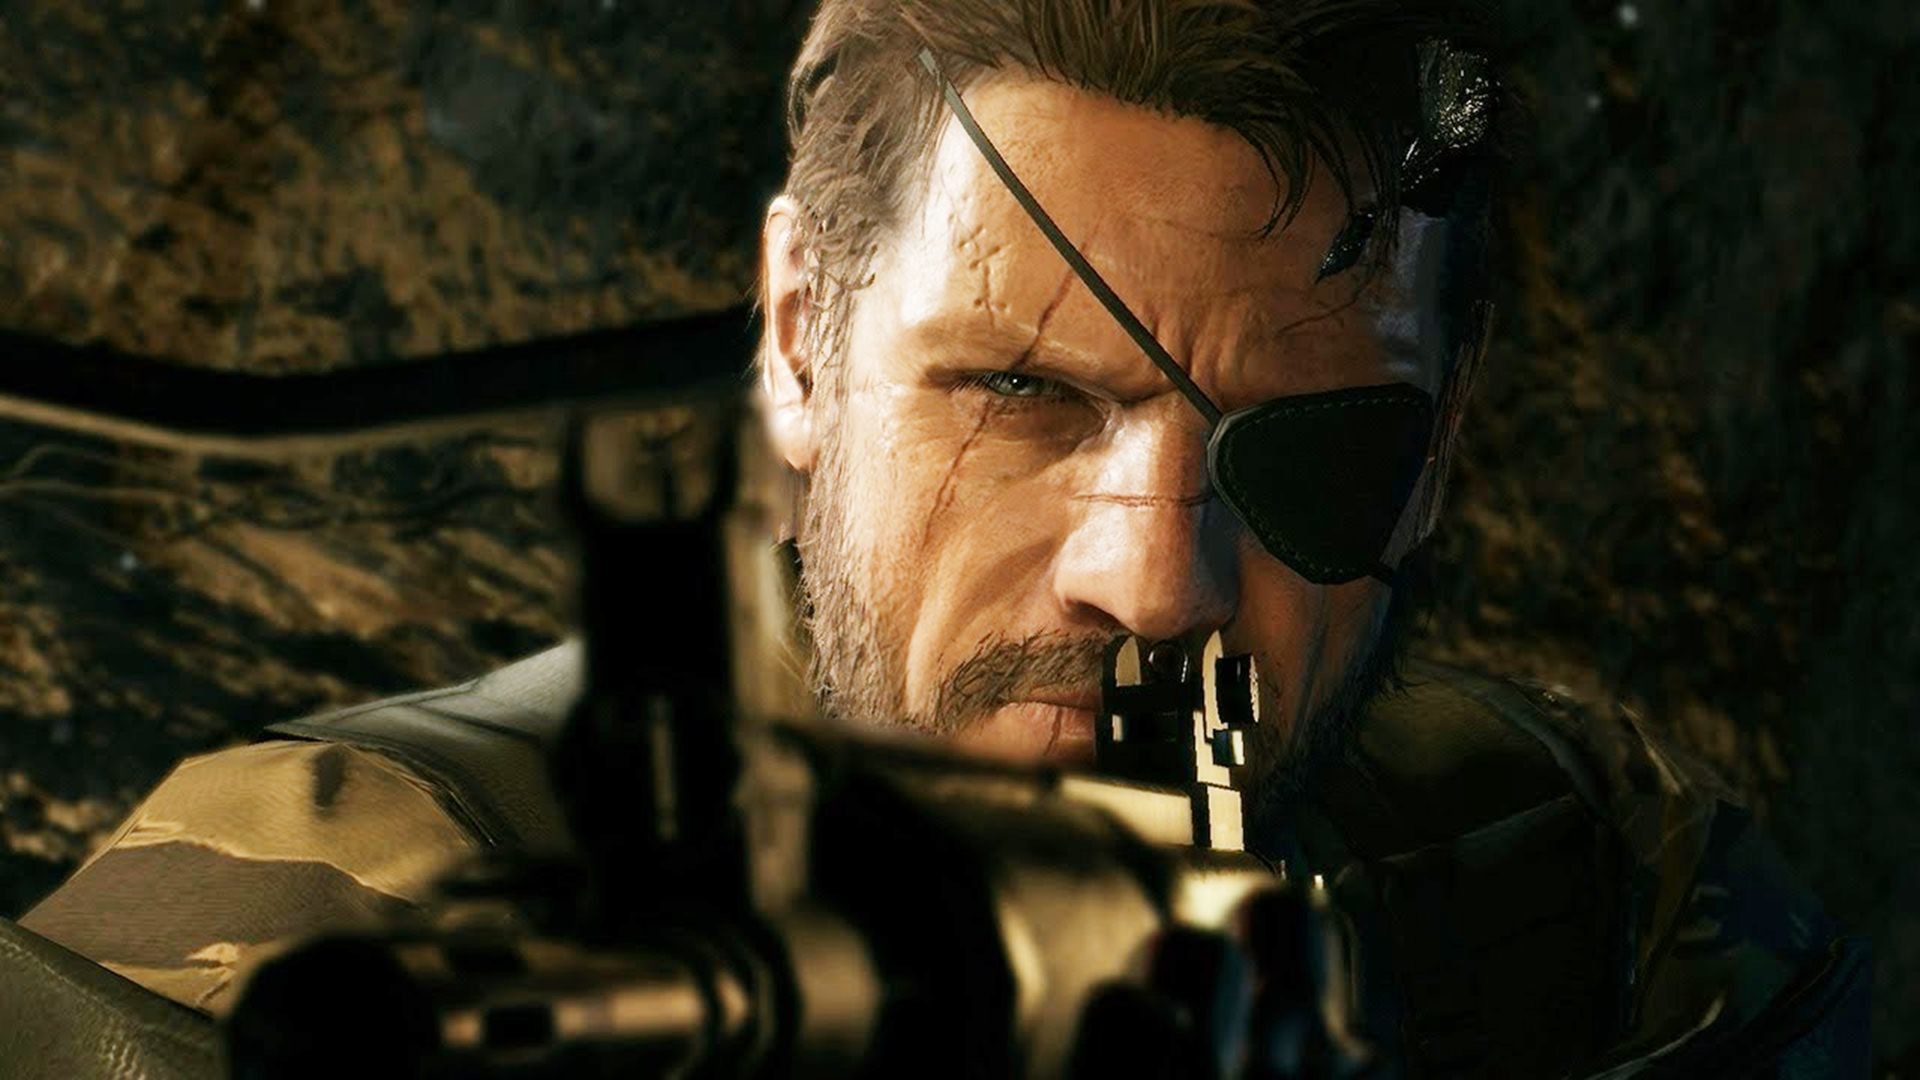 Metal Gear Solid V the Phantom Pain HD Wallpapers (85+ pictures)